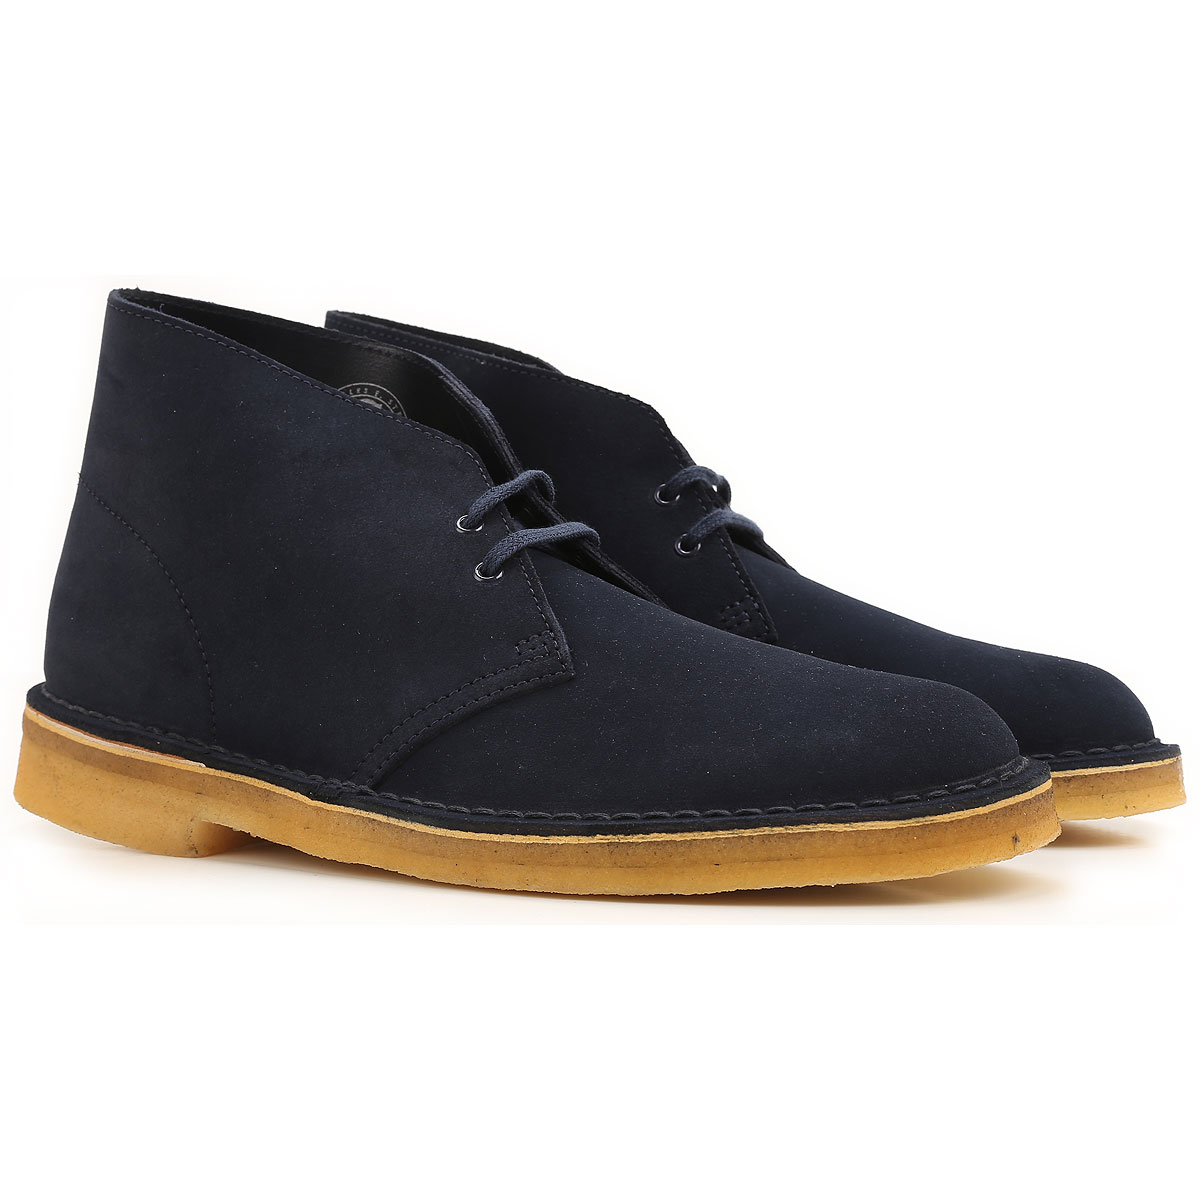 Mens Shoes Clarks, Style code: 21621-00050-